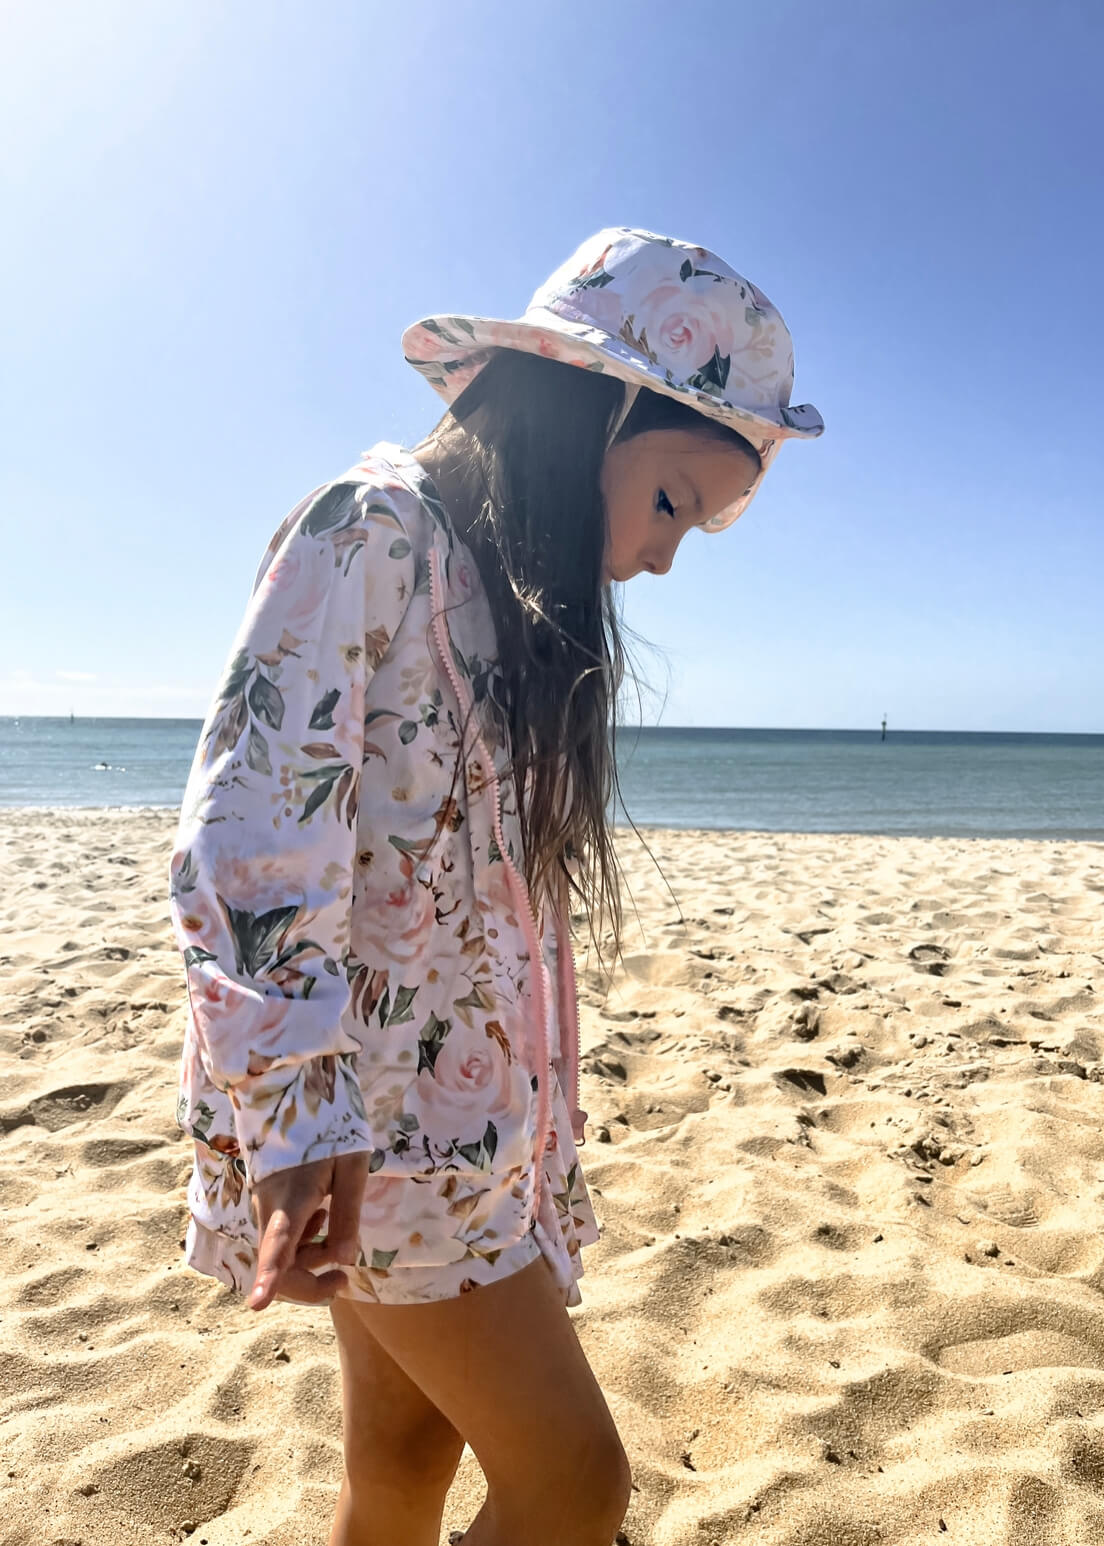 Young girl wearing matching swimming dress with snaps, jacket and swim hat in floral